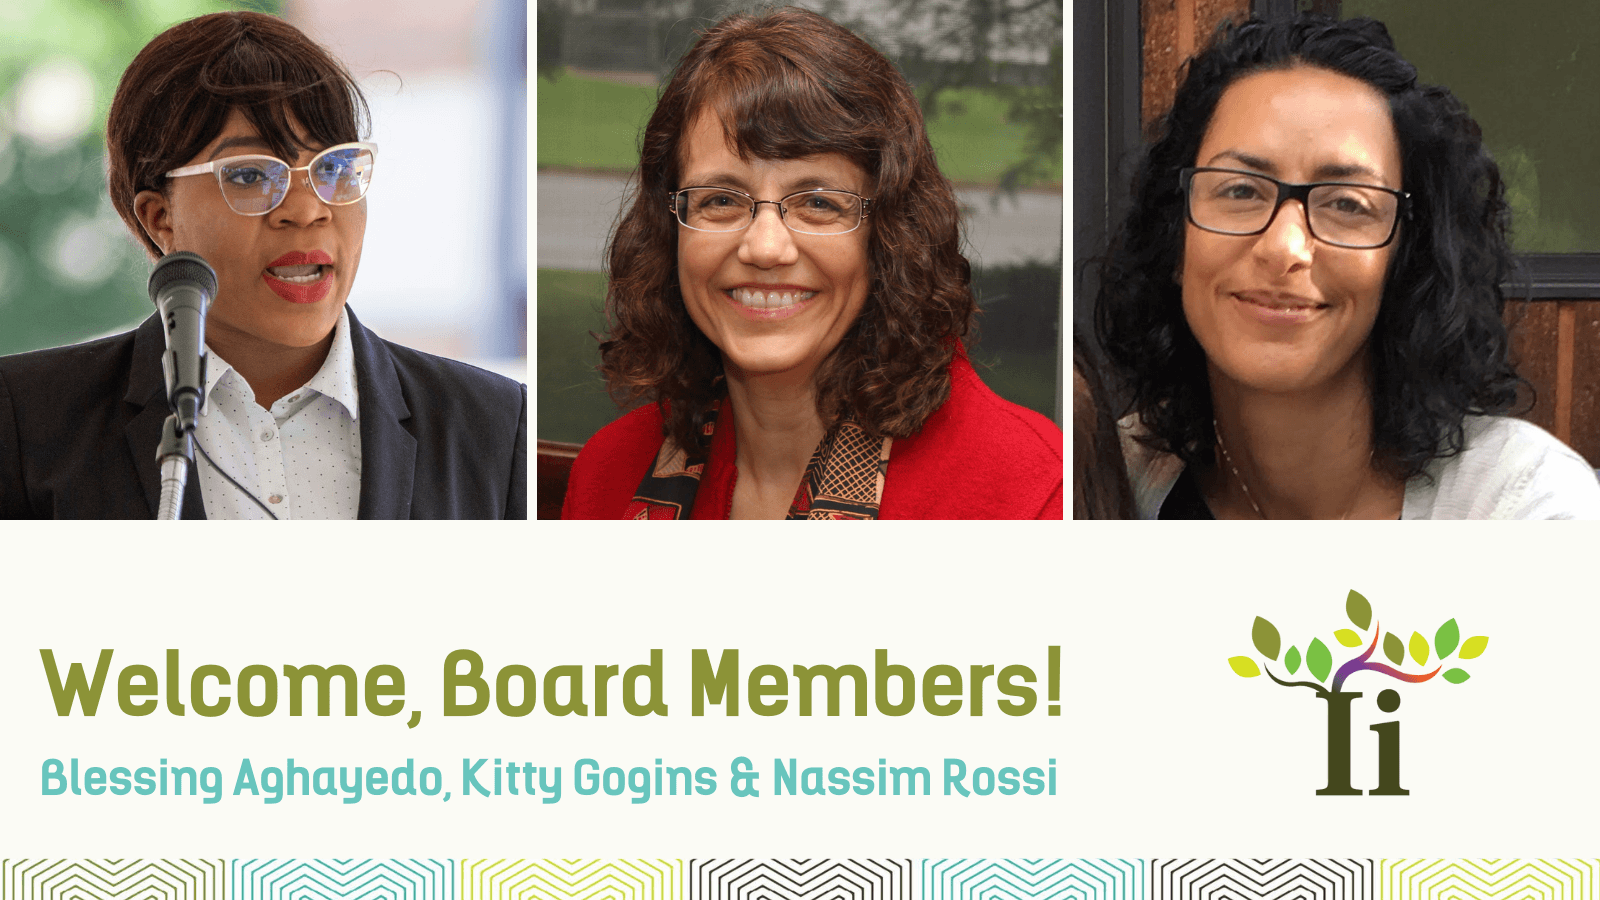 Welcome, Board Members! Blessing Aghayedo, Kitty Gogins & Nassim Ros